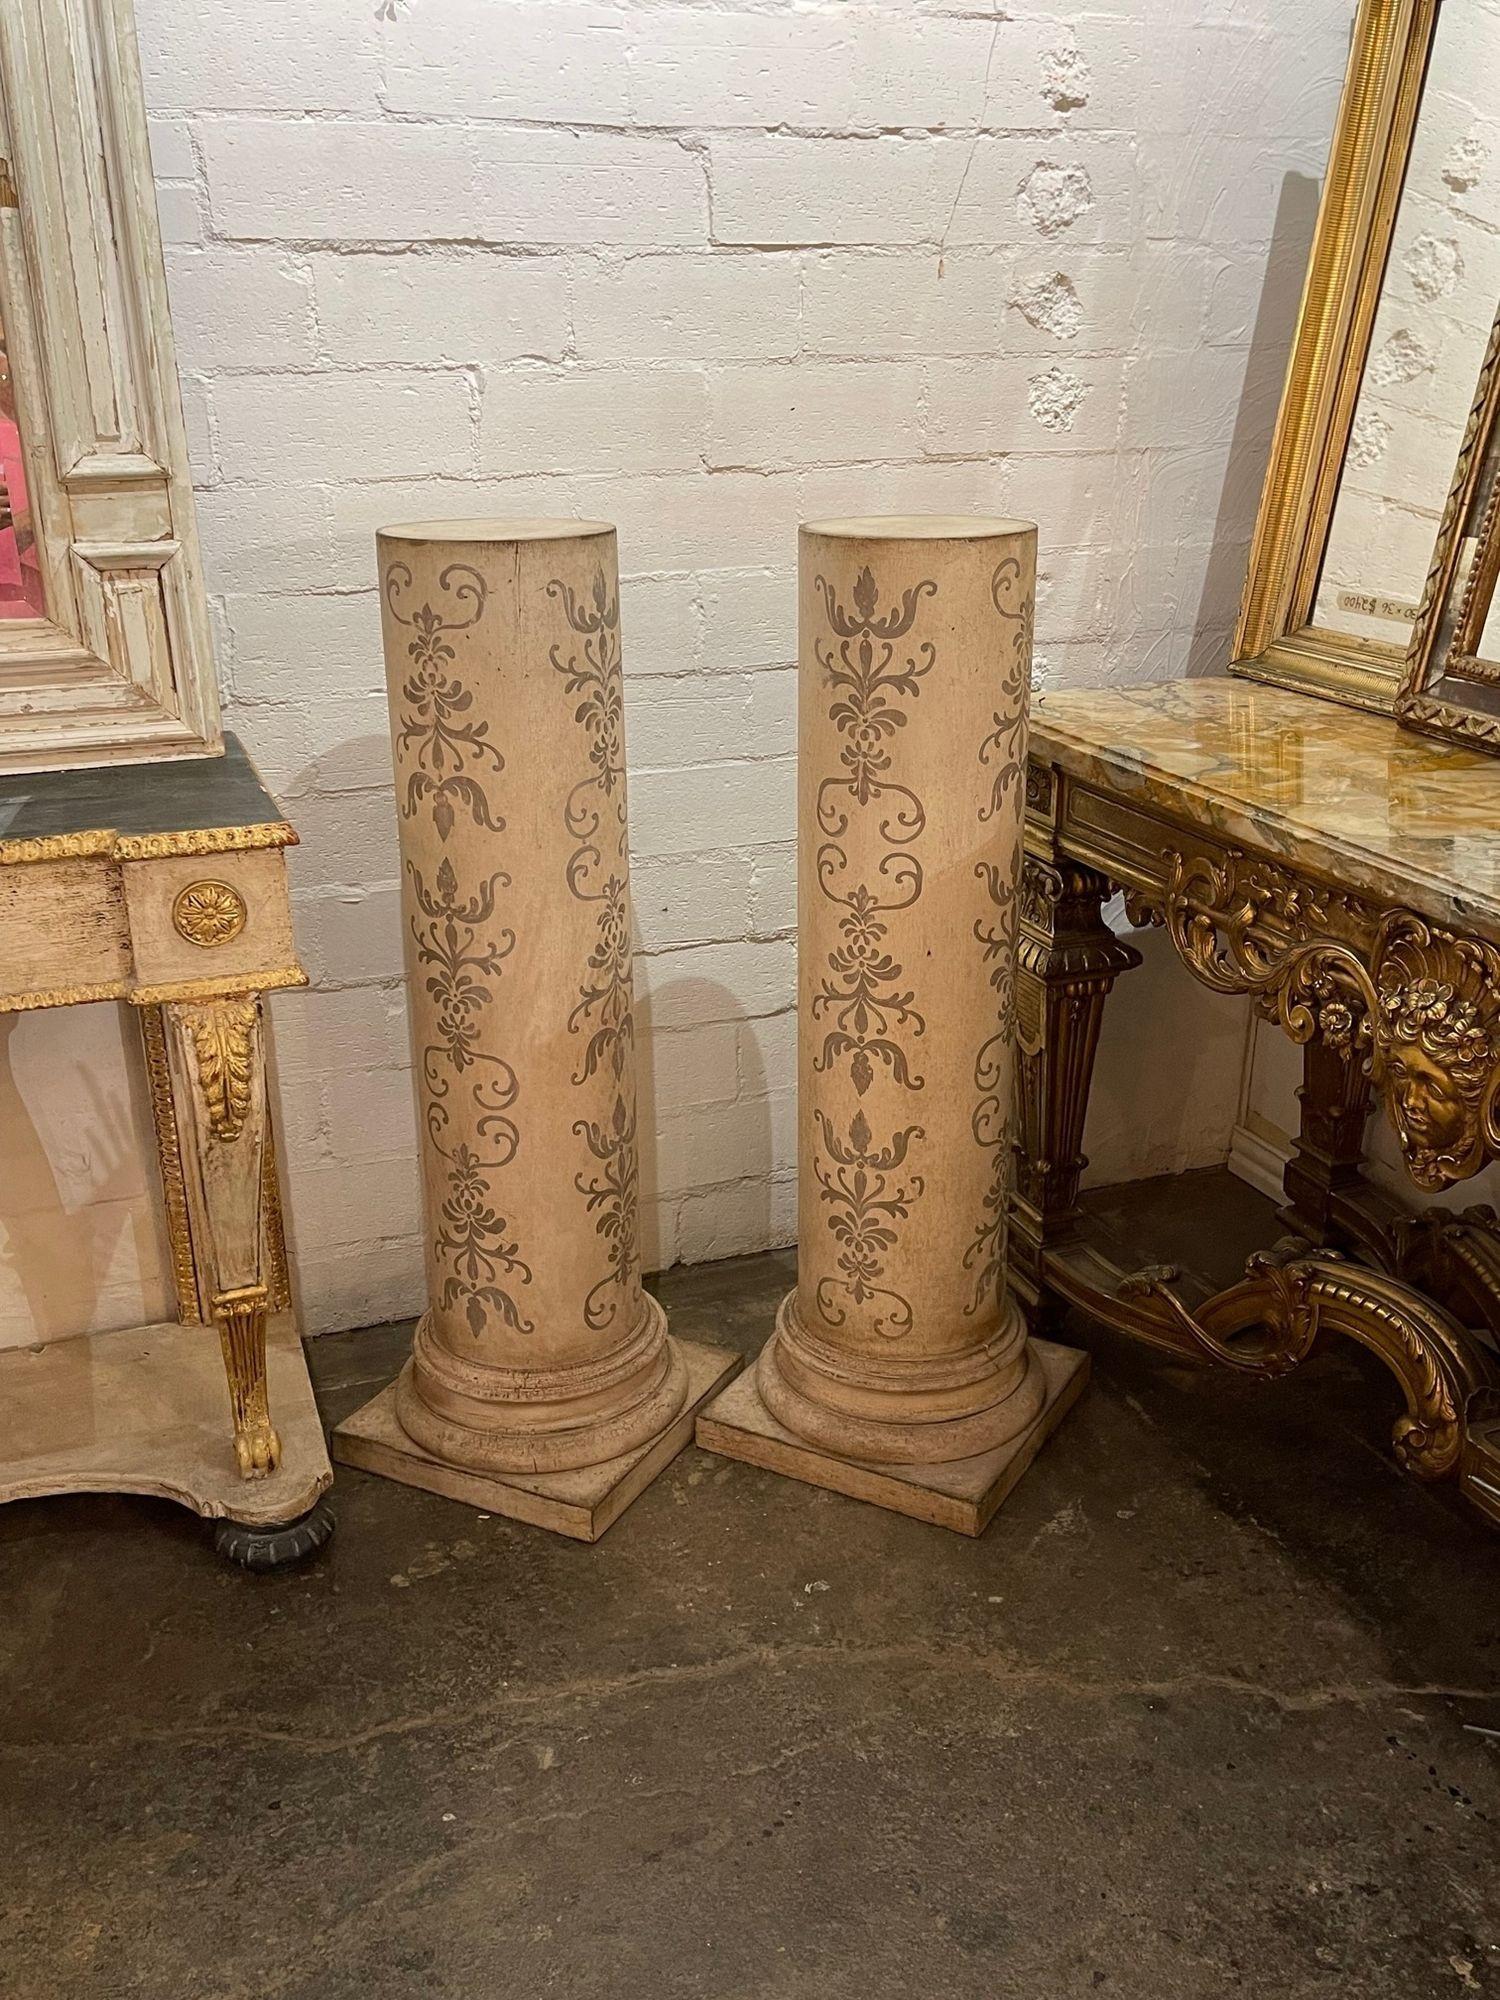 Very nice pair of vintage hand painted Italian wooden pedestals from Florence Italy. Featuring a decorative design painted in antique gold. A fabulous accessory!!